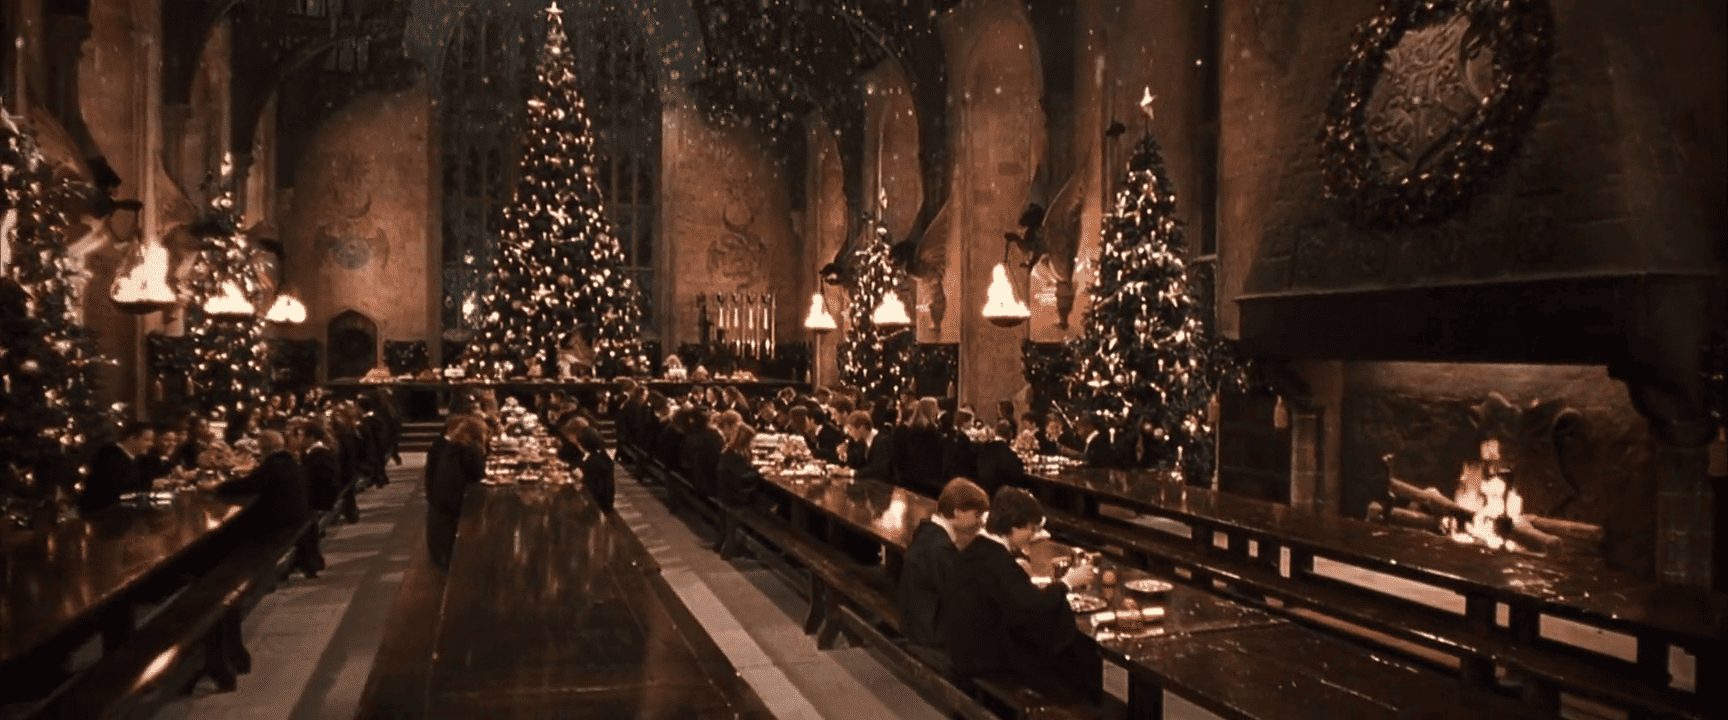 Harry Potter Christmases, Ranked